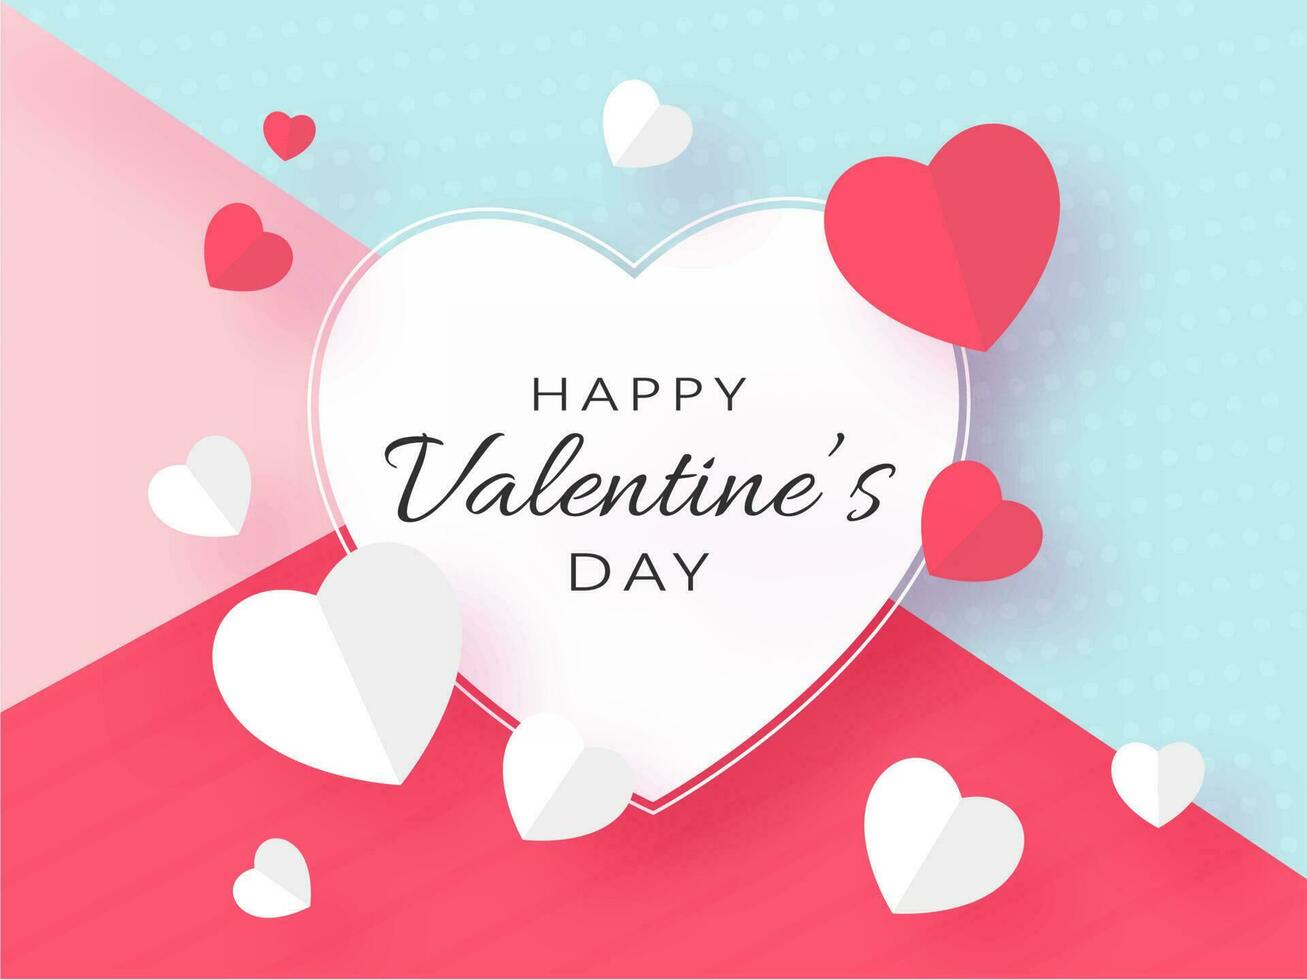 Happy Valentine's Day Text with Red and White Paper Hearts Decorated on Colorful Abstract Background. vector